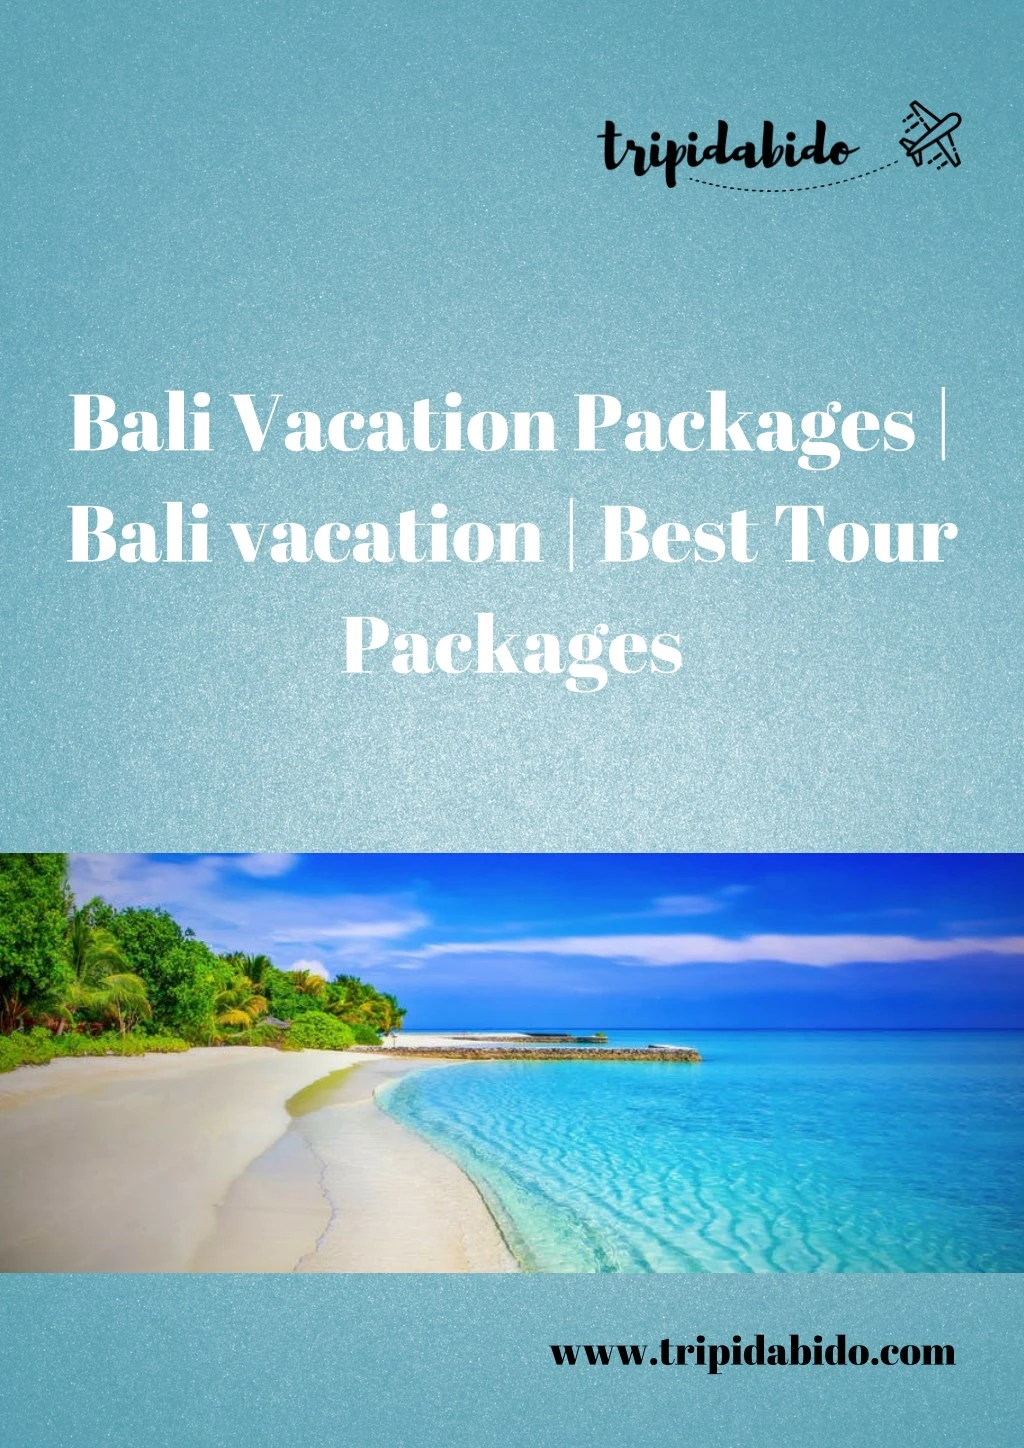 bali vacation packages bali vacation best tour